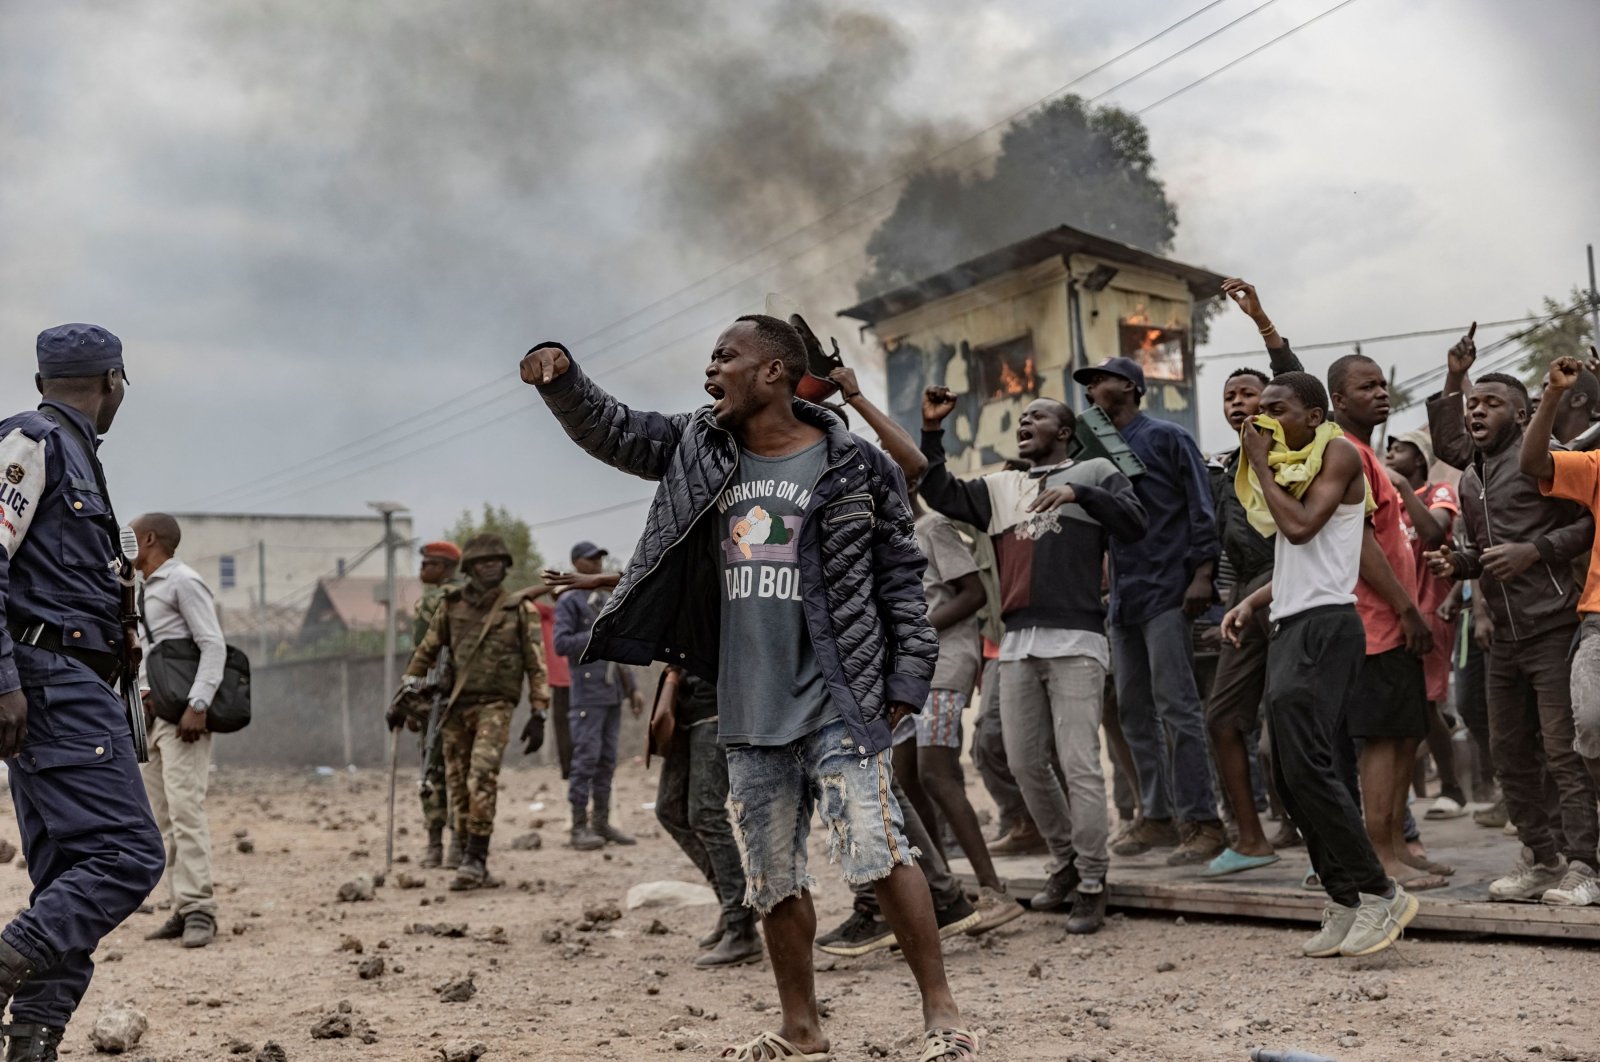 Congolese demonstrators gesture during a protest against the U.N. peacekeeping mission MONUSCO in Goma, Democratic Republic of Congo, July 26, 2022. (AFP Photo)